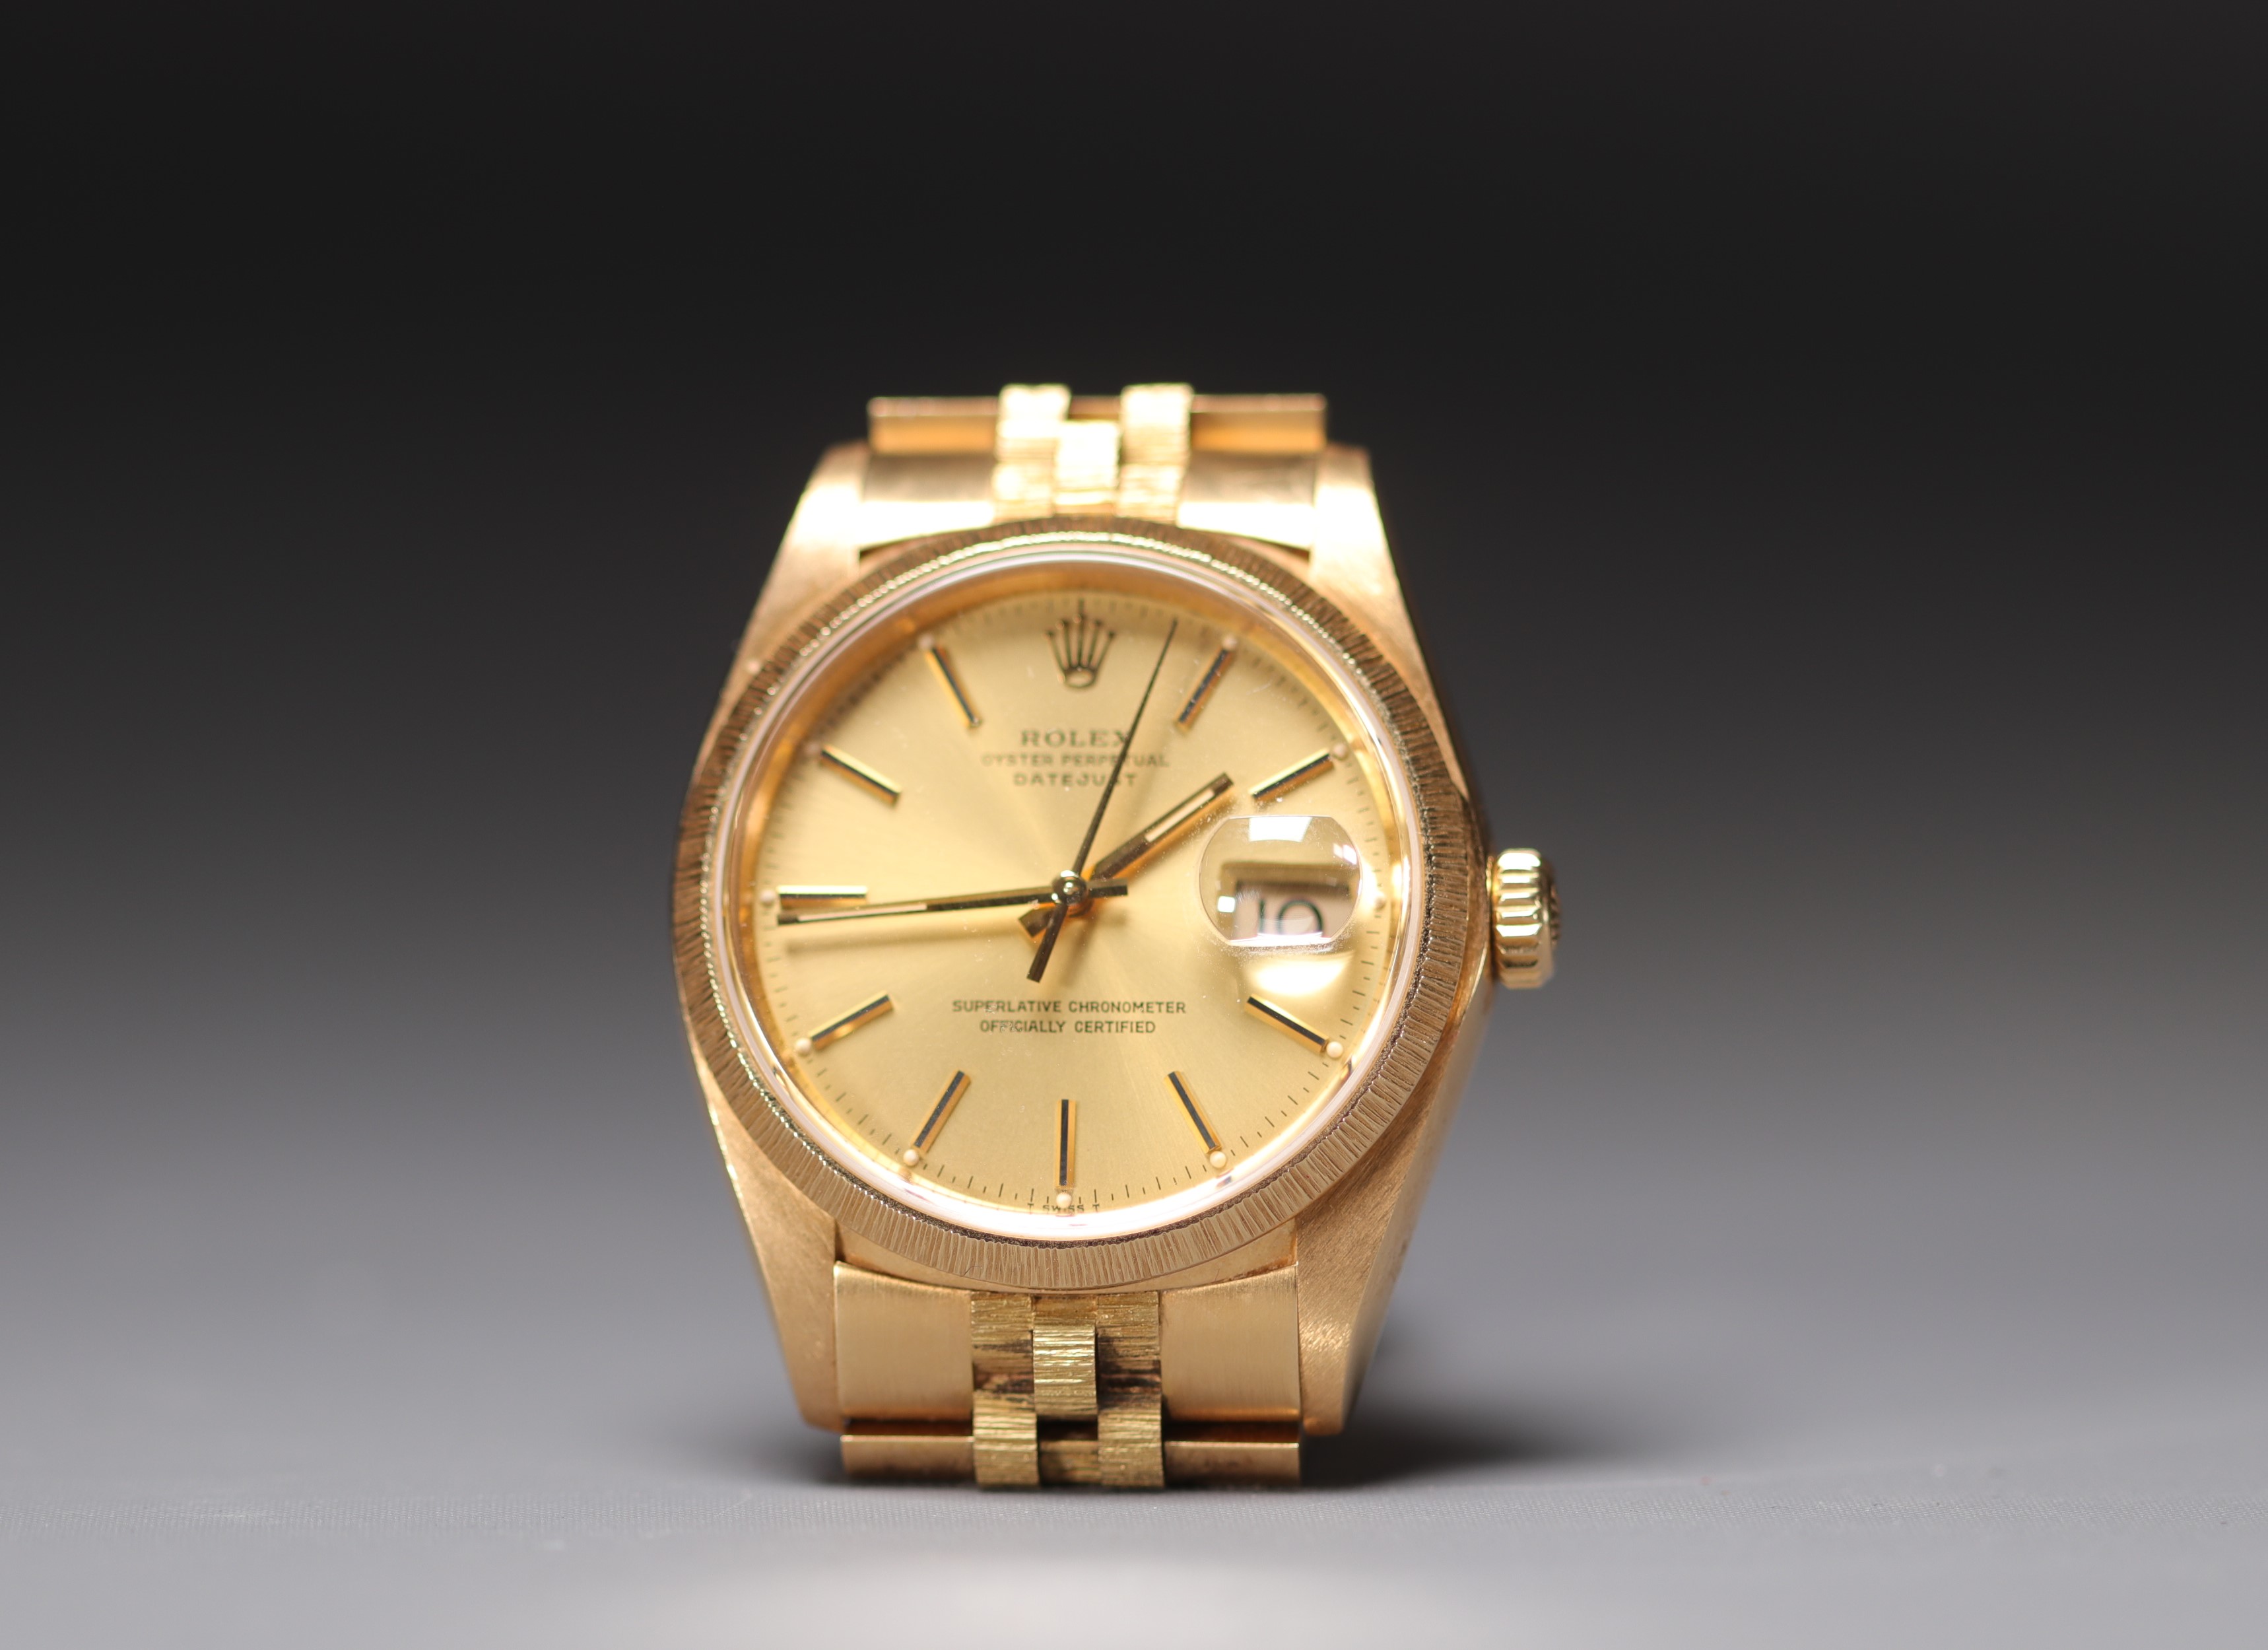 Rolex Oyster Perpetual Datejust (16078) in 18k yellow gold, "Jubilee" bracelet, Full Set, year 1980. - Image 3 of 4